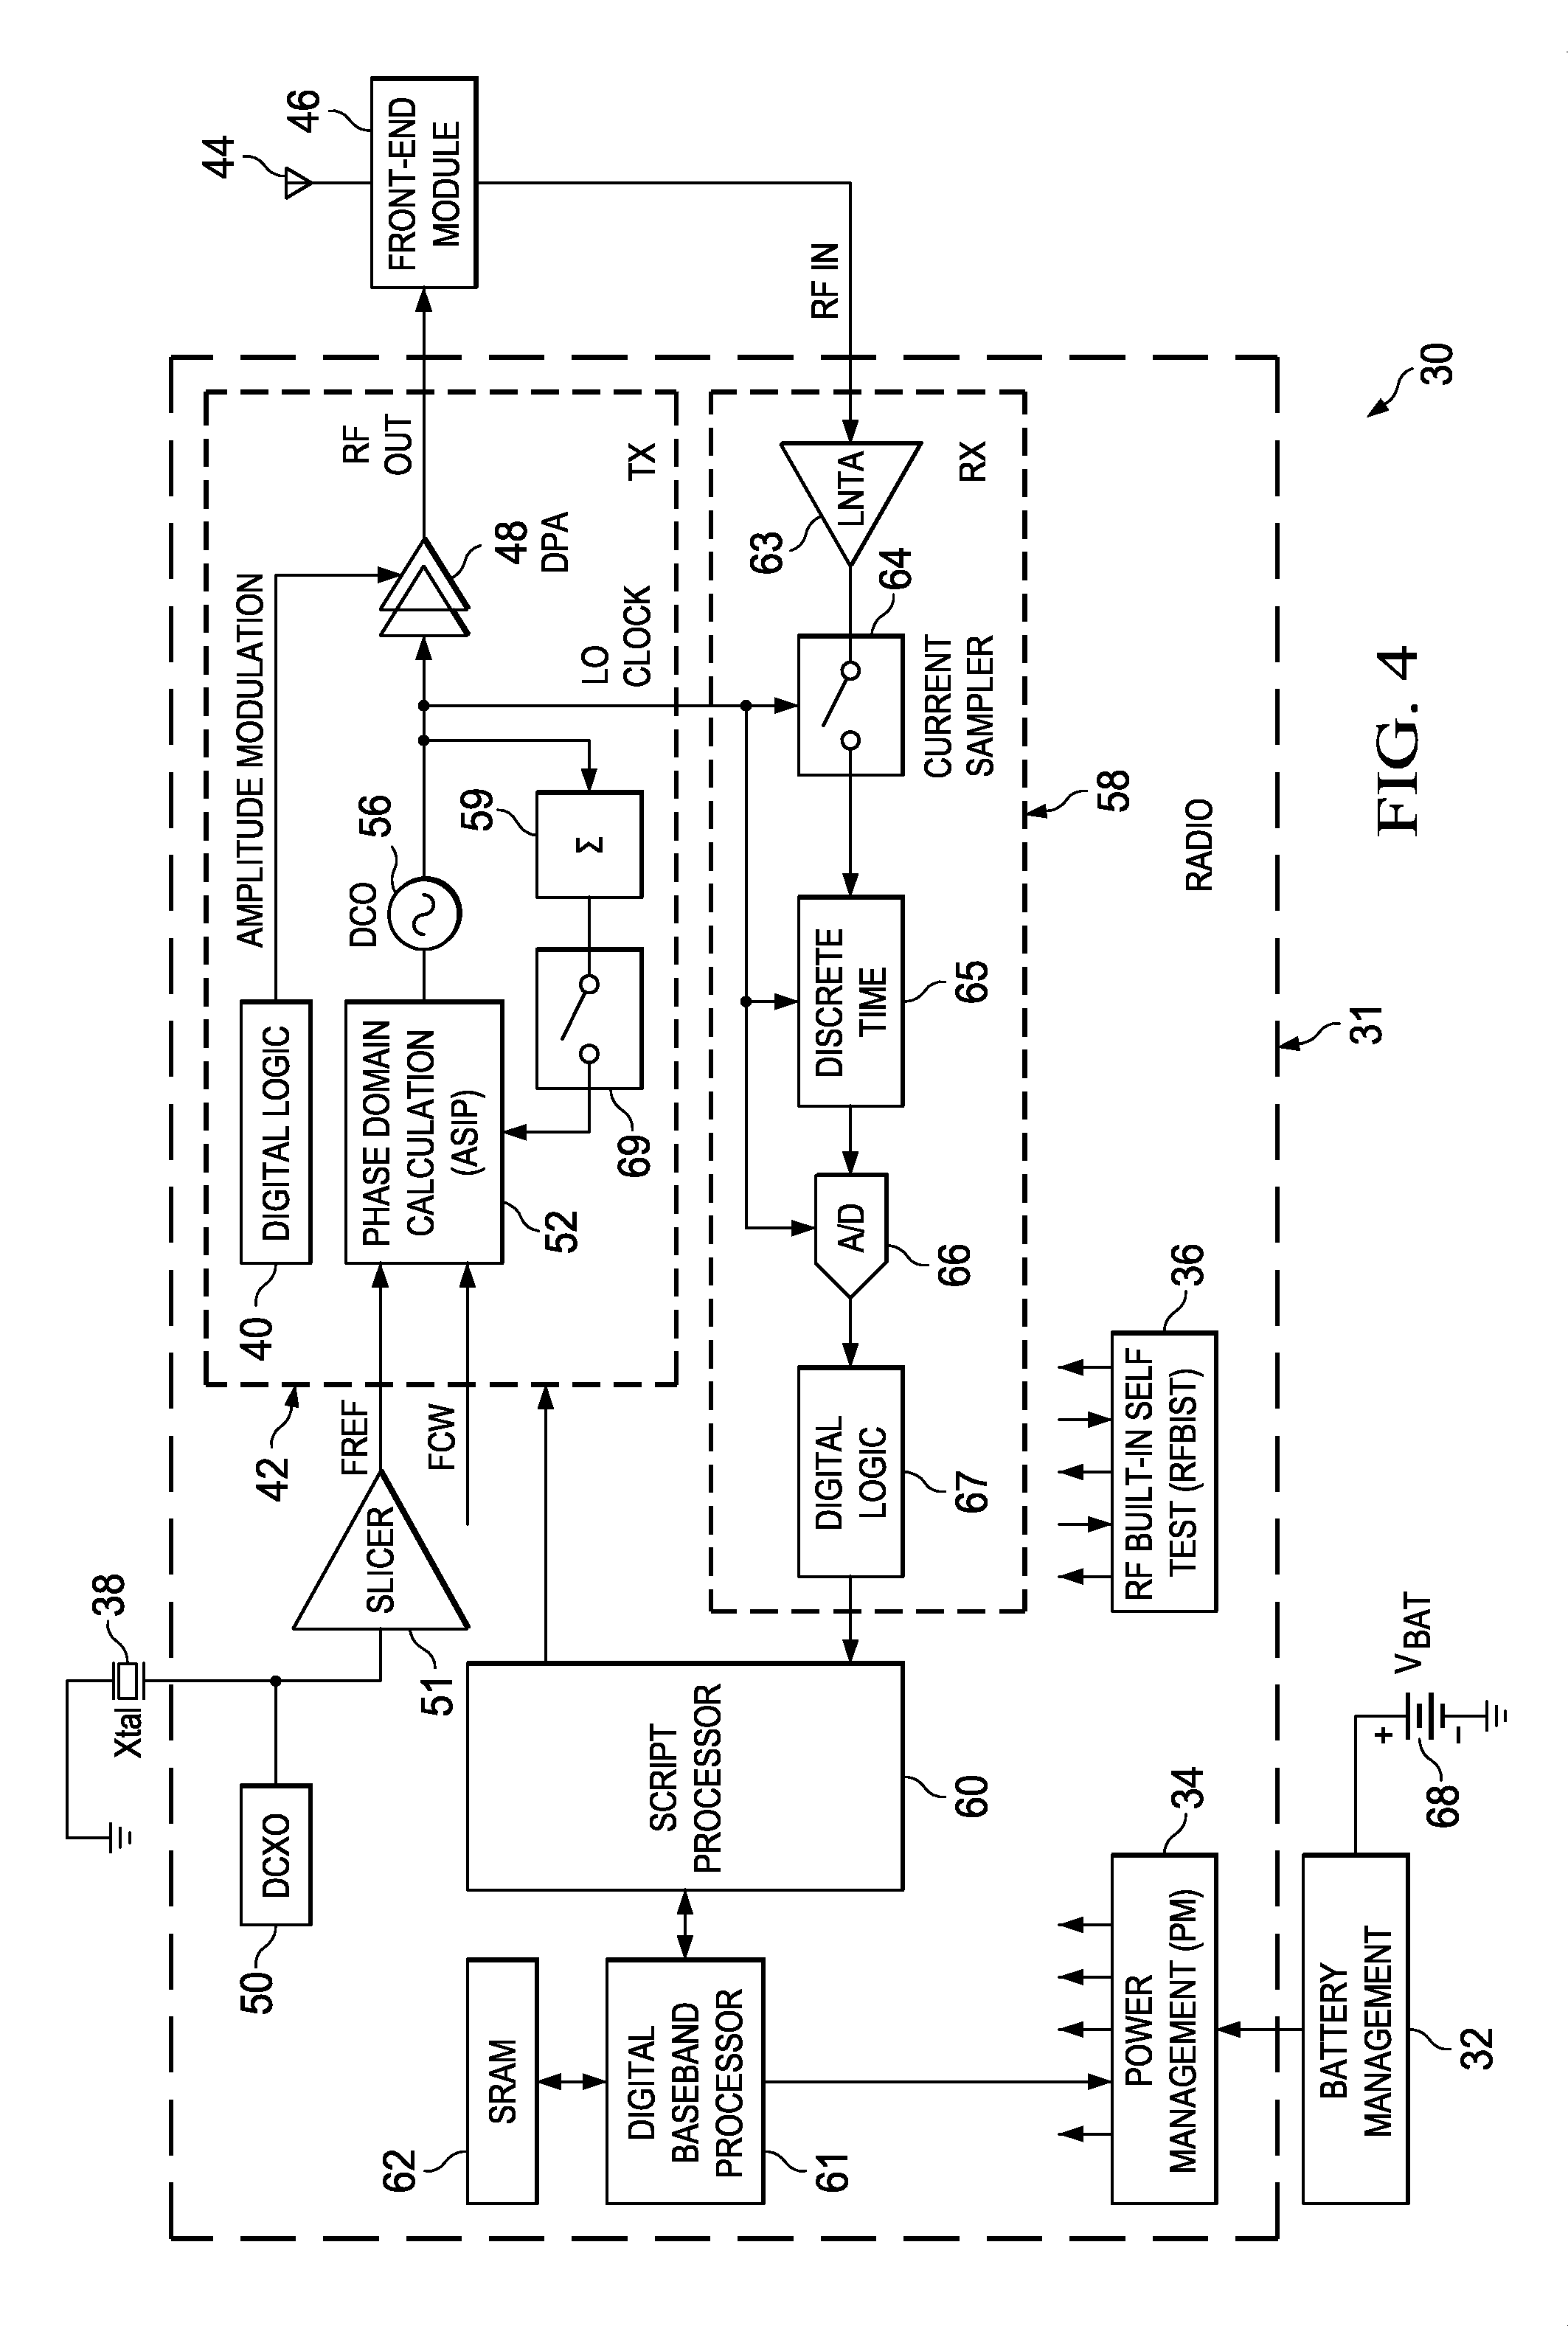 Software reconfigurable digital phase lock loop architecture